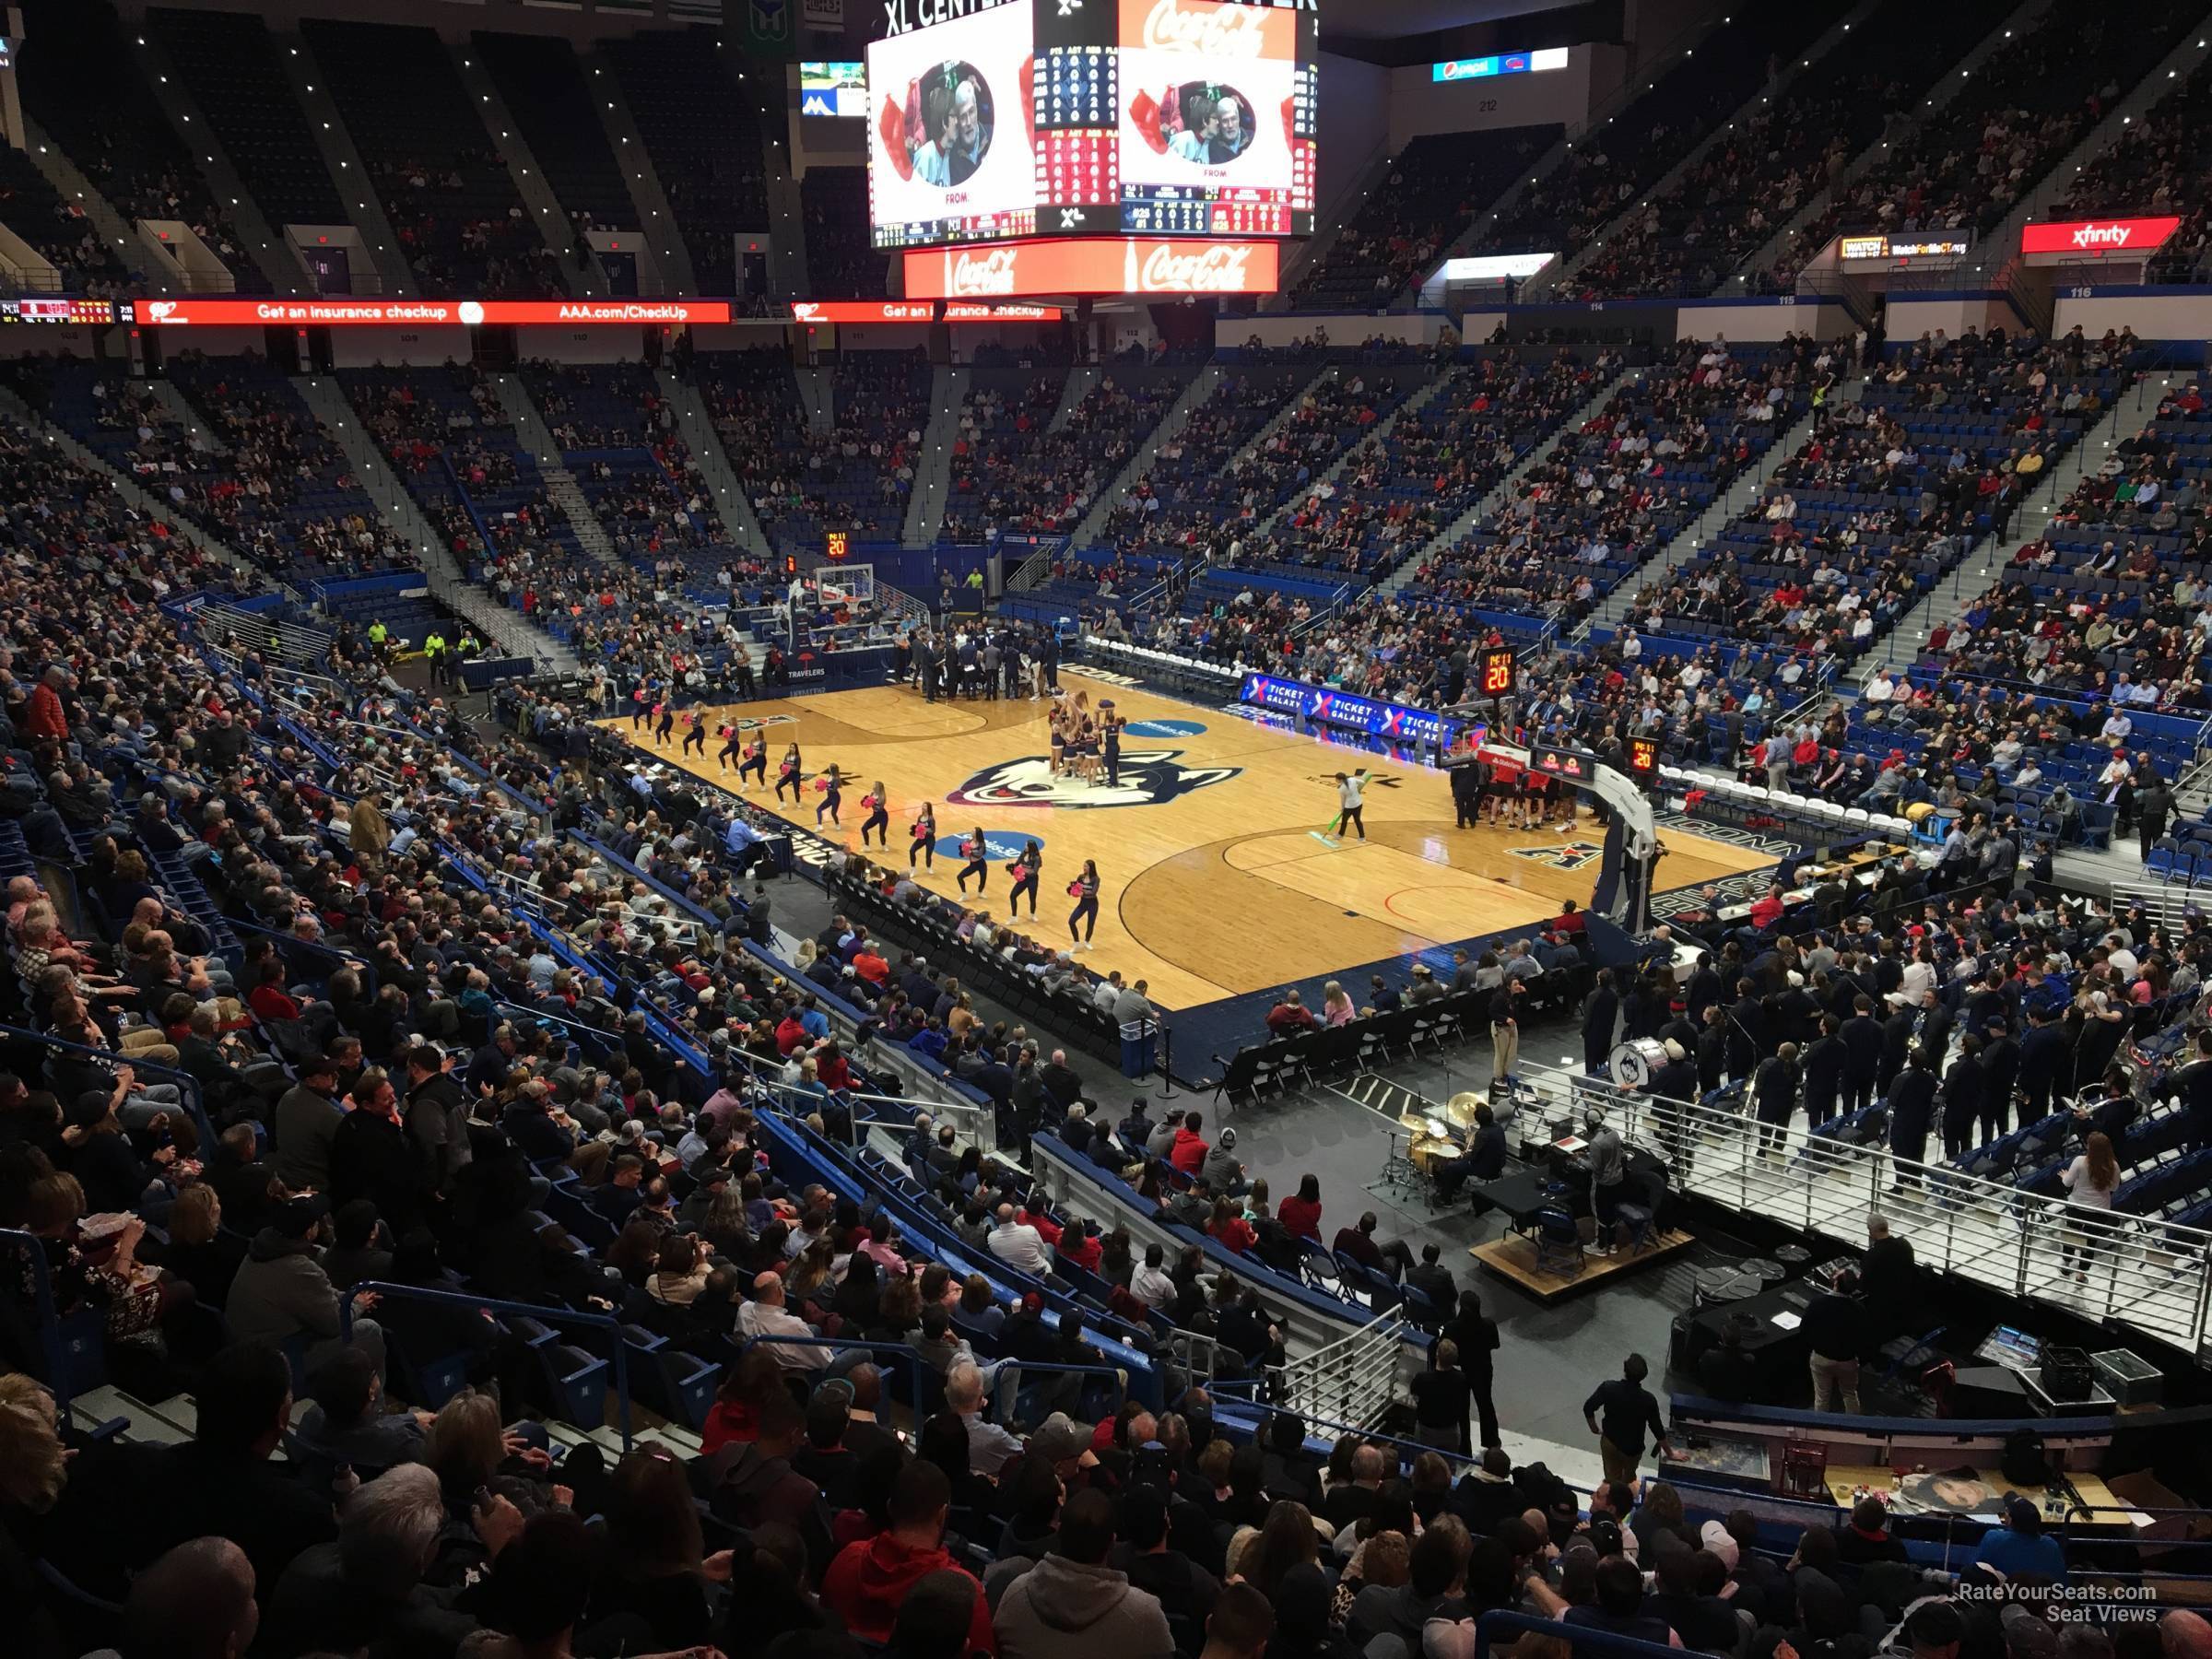 section 124, row s seat view  - xl center